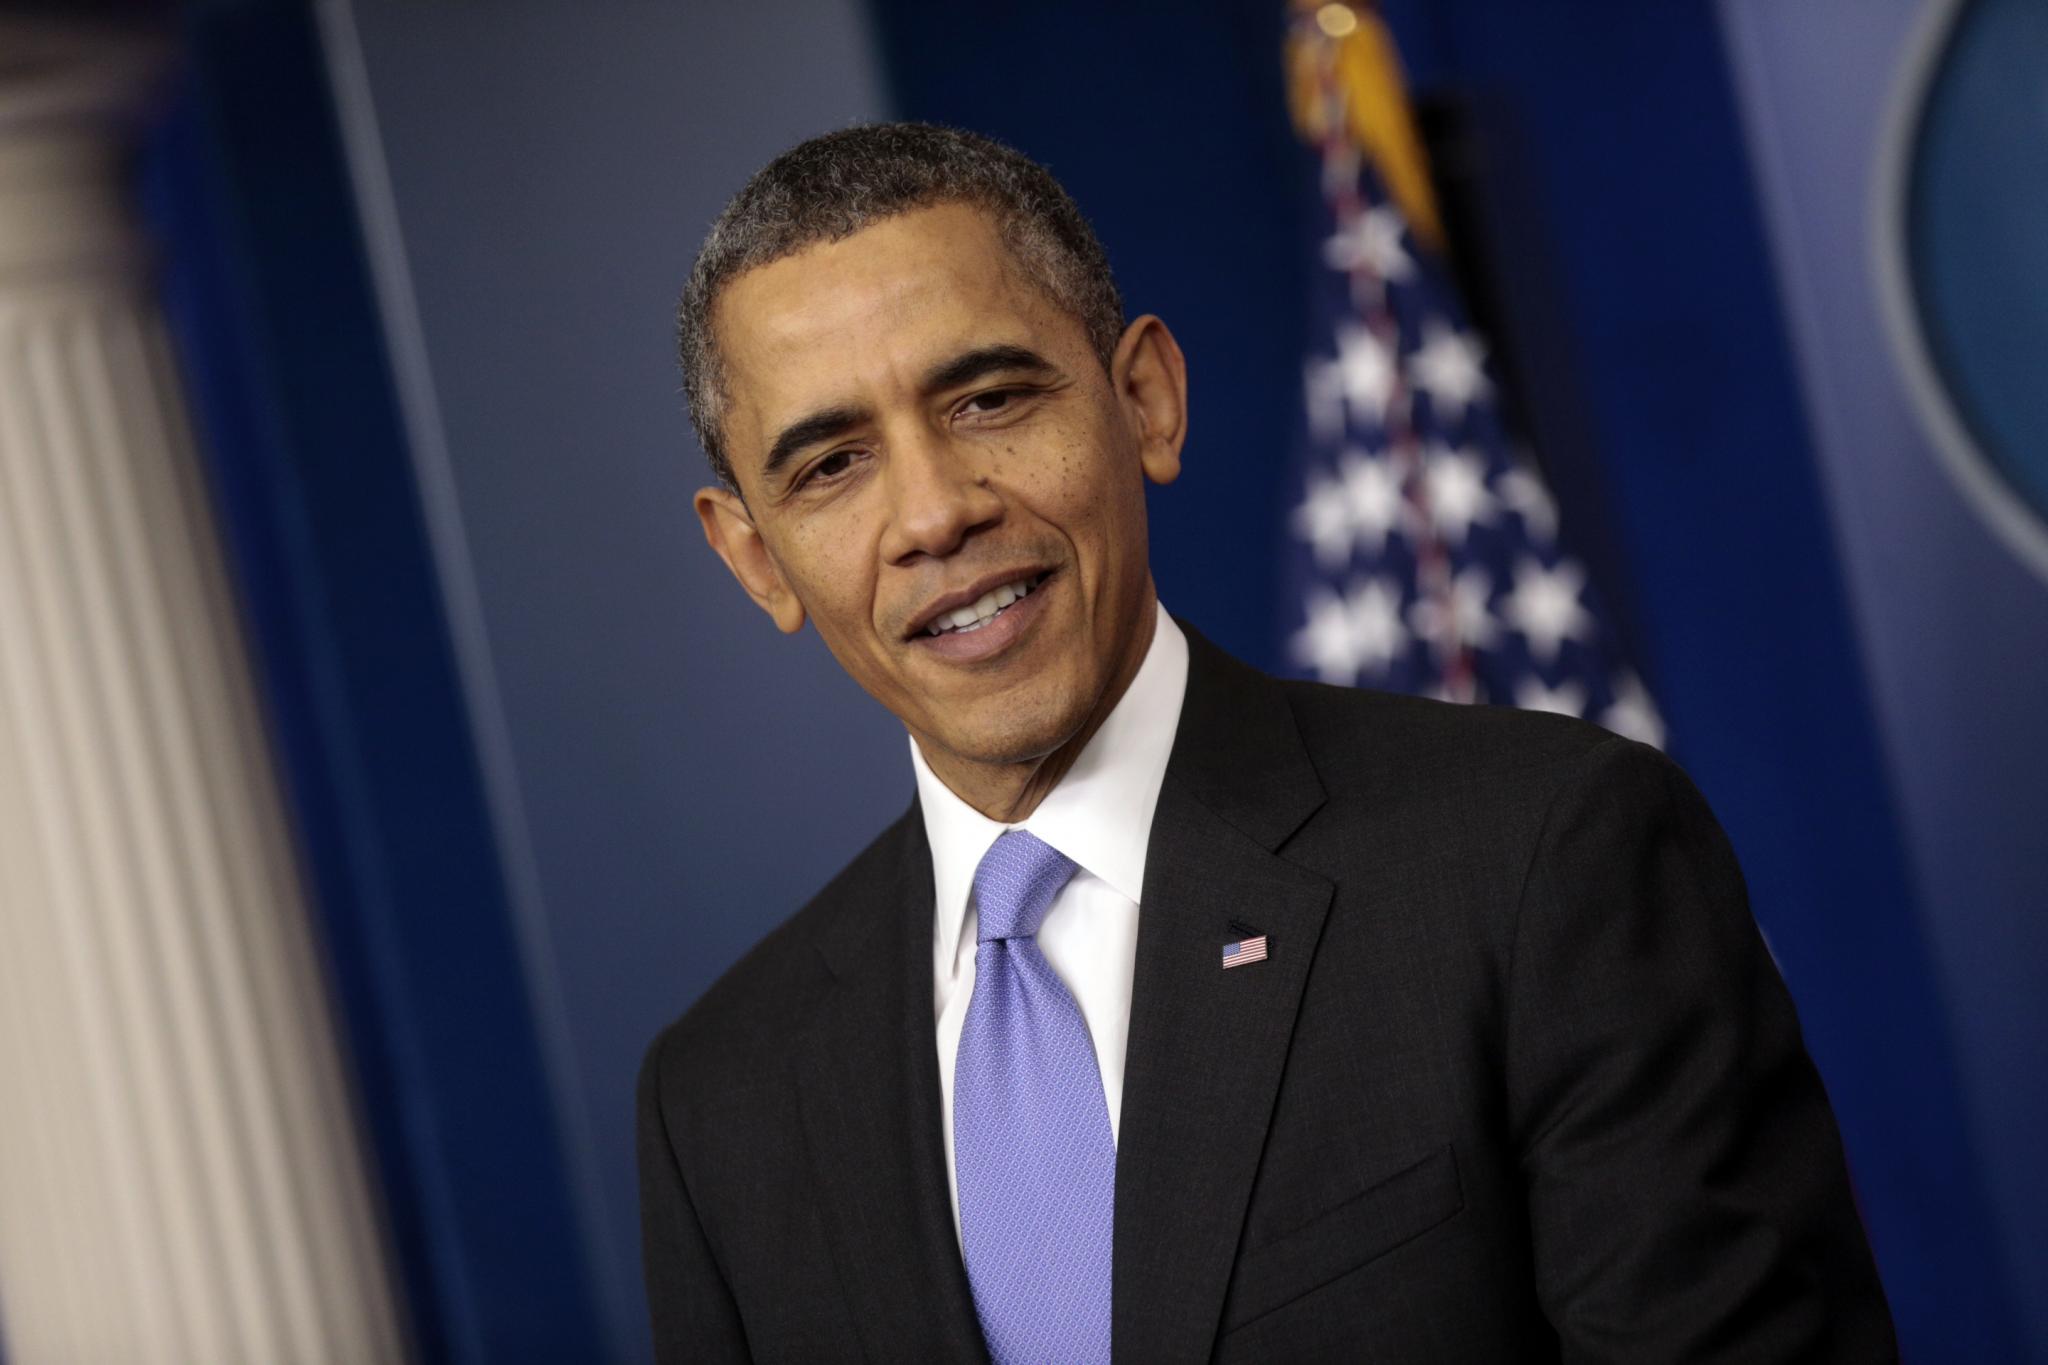 President Obama Is Most Admired Living Man of 2013
